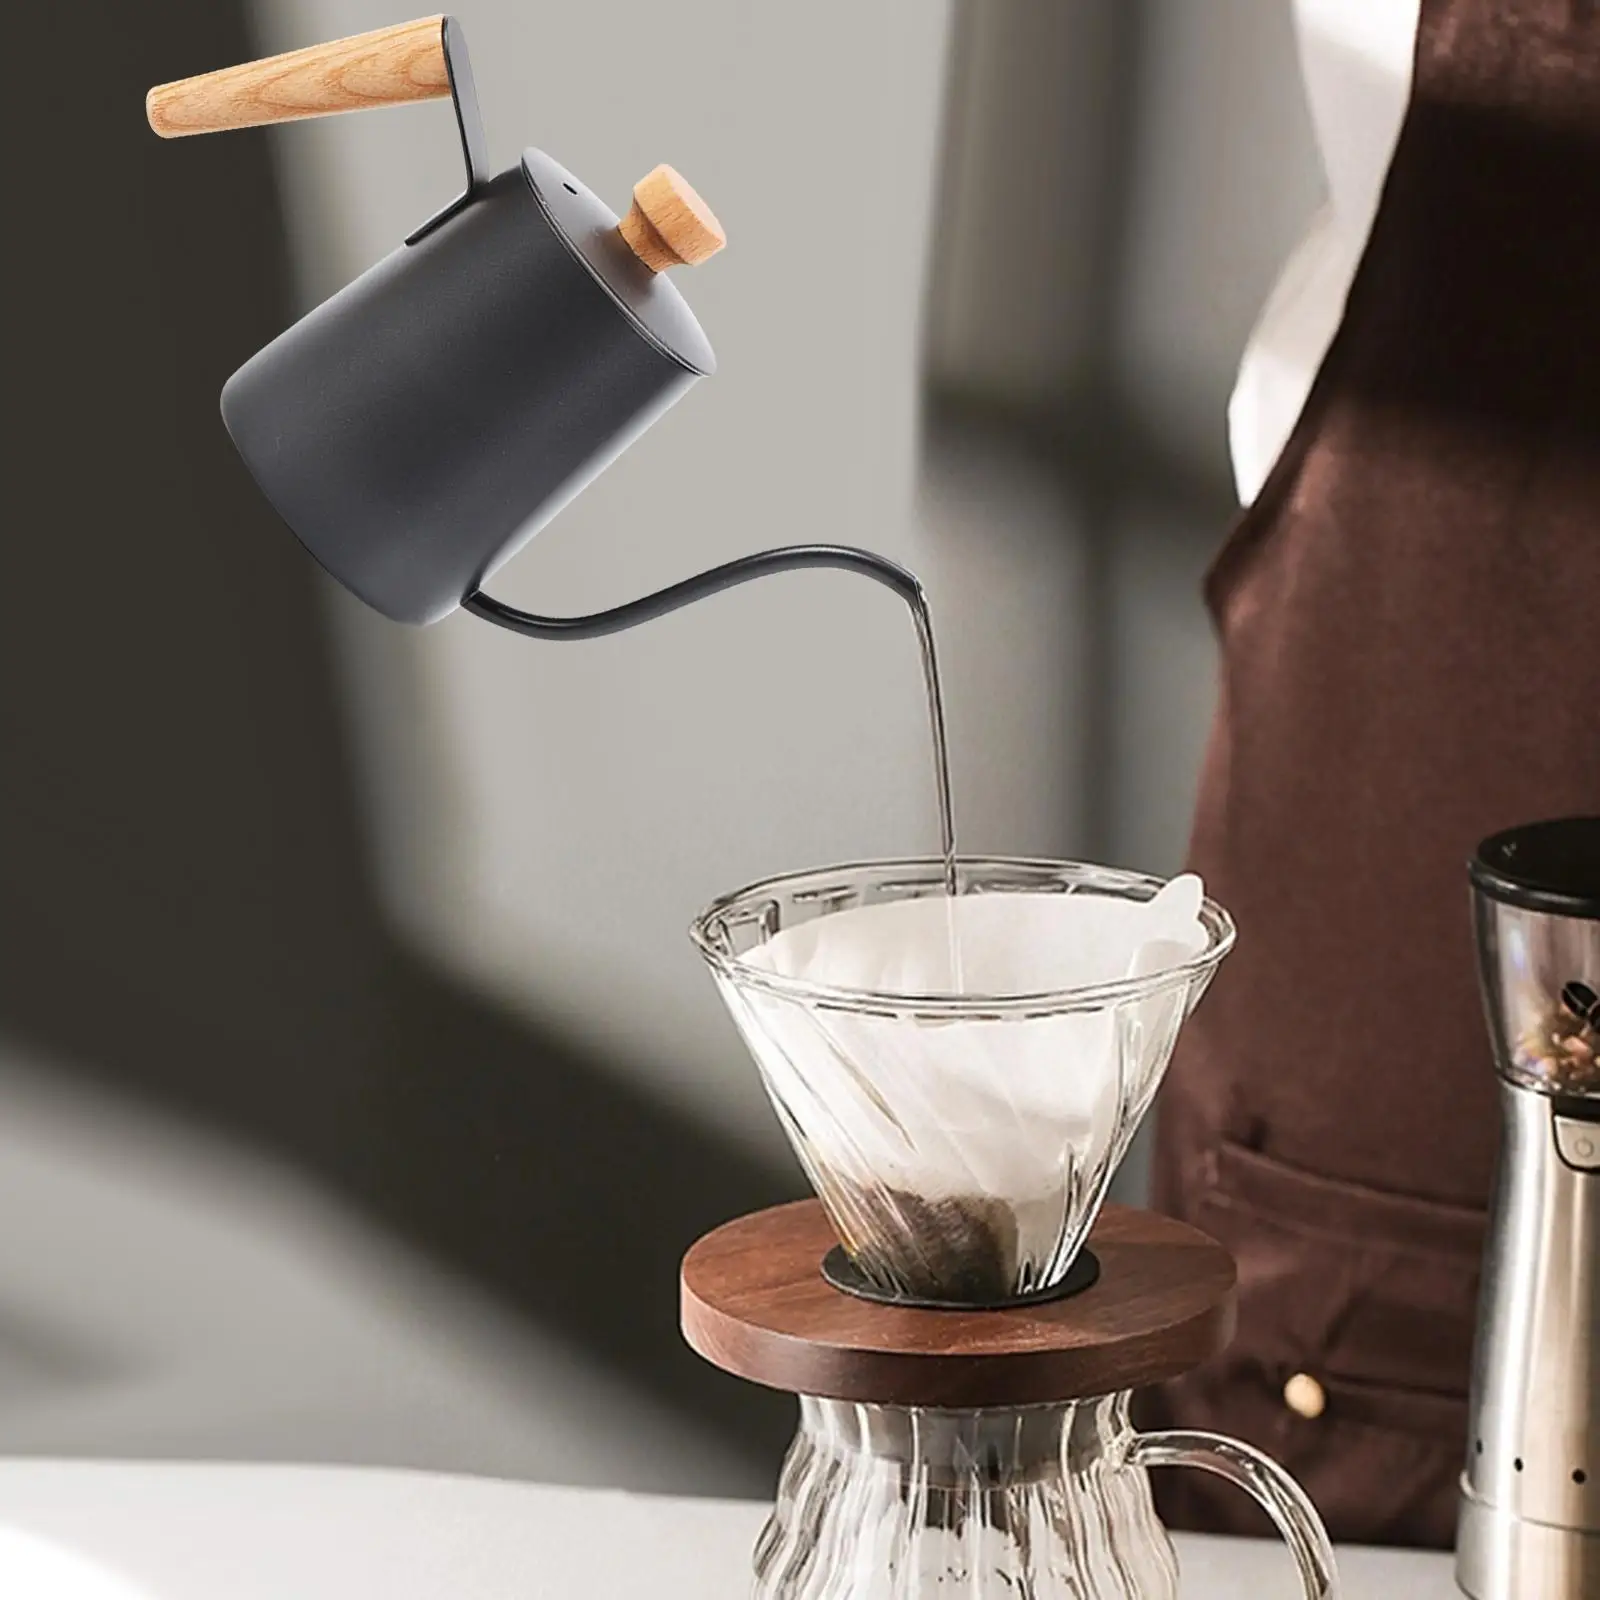 Drip Coffee Kettle Tea Kettle Ergonomic Handle Long Narrow Spout Pour over Coffee Kettle for Cafe Camping Outdoor Coffee Maker